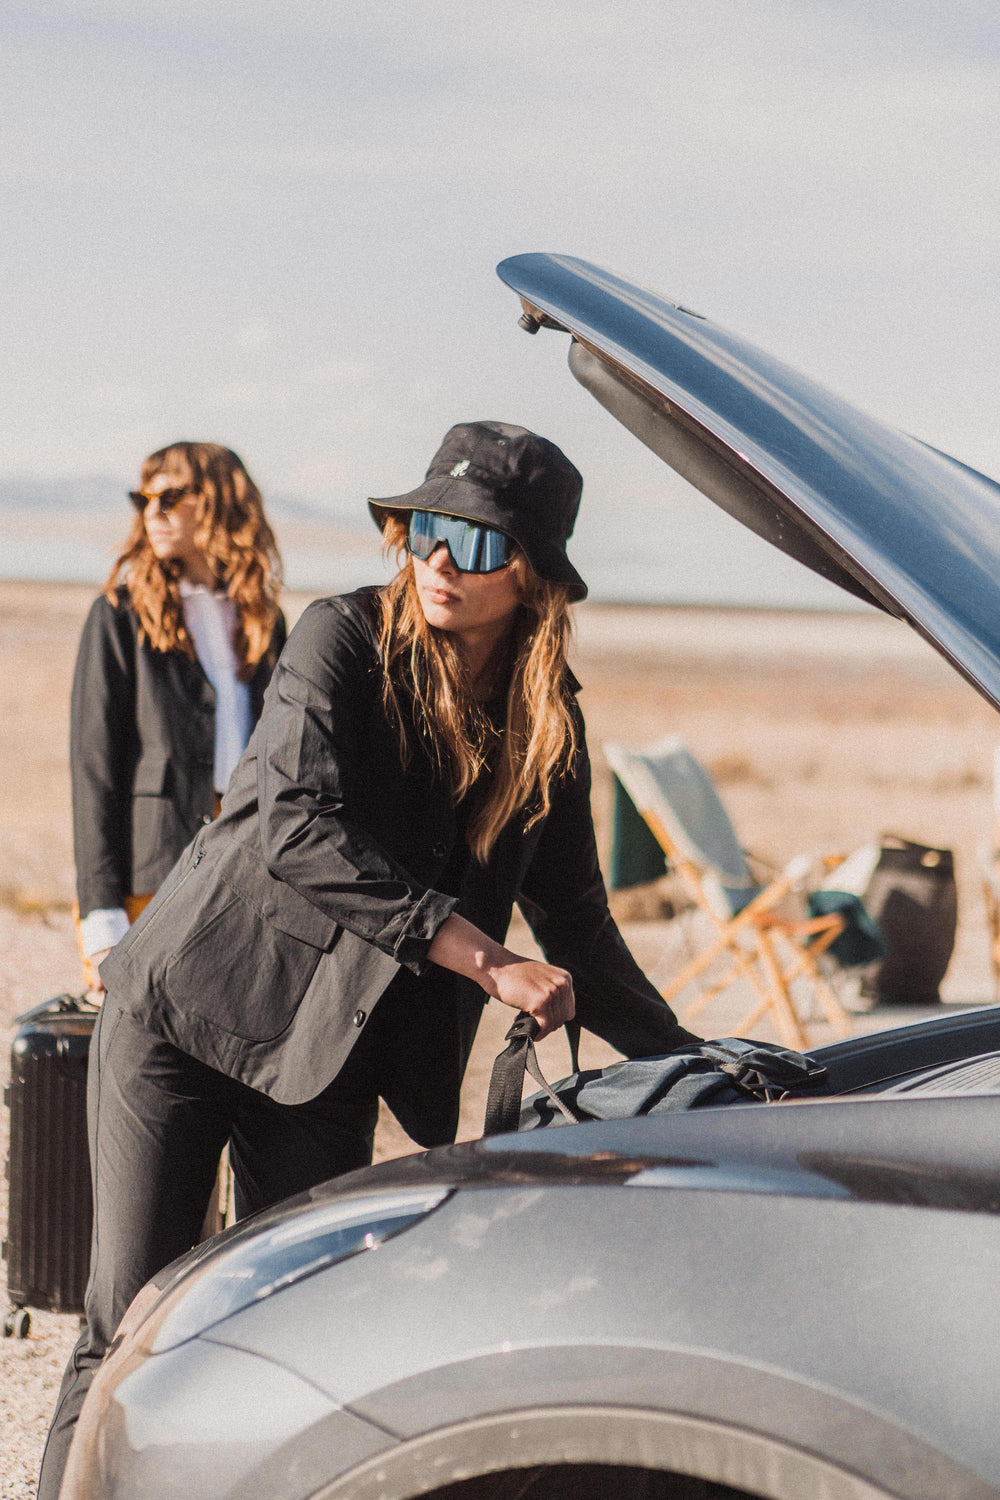 female model wearing dark suit, bucket hat and sunglasses unloading trunk, backround in blur camping chair and another female